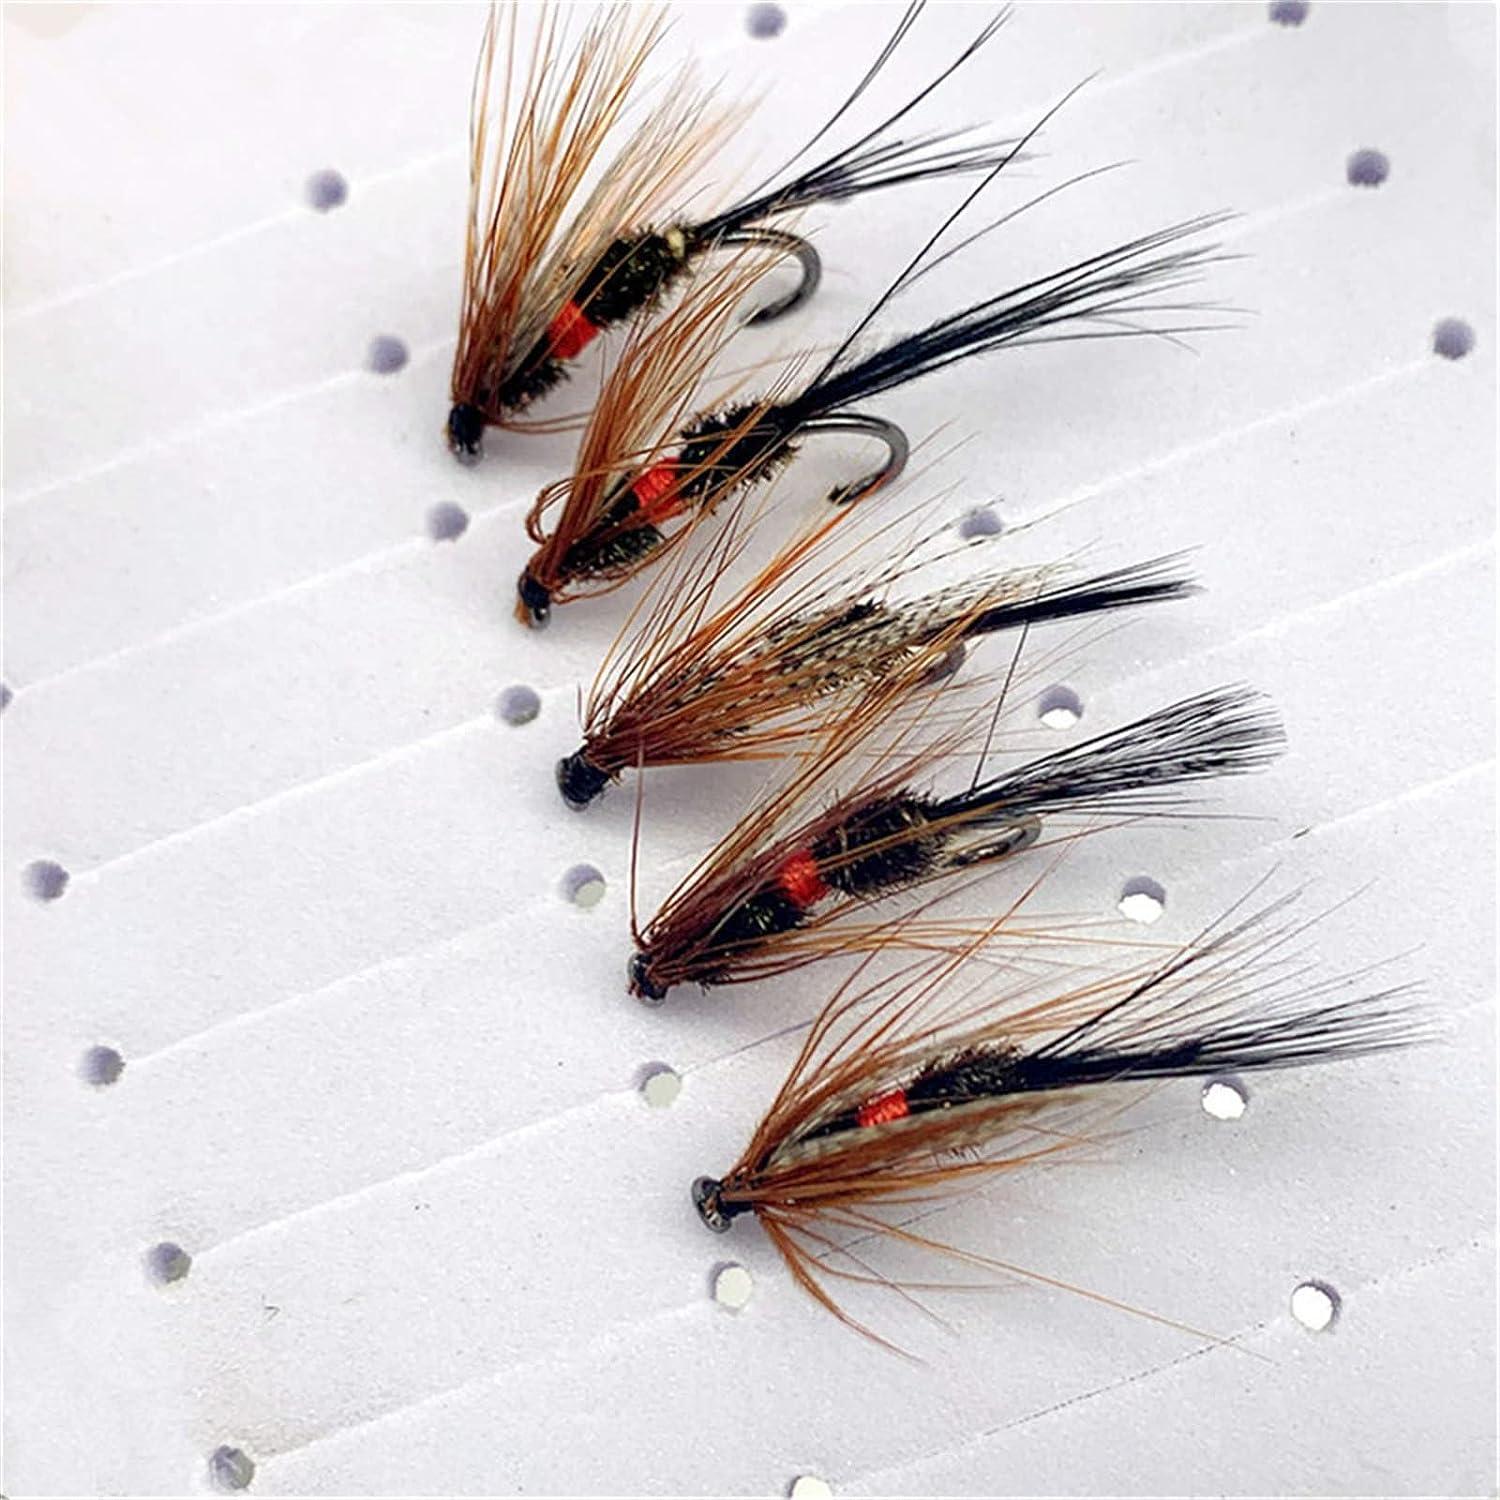 Qievcrme 24/127-Pieces Fly Fishing Files Kit #8-#16 Handmade Dry Wet Nymphs  Streamers Fly Fishing Lures for Trout Salmon with Fly Box 24Pcs/Box(Single  Style)